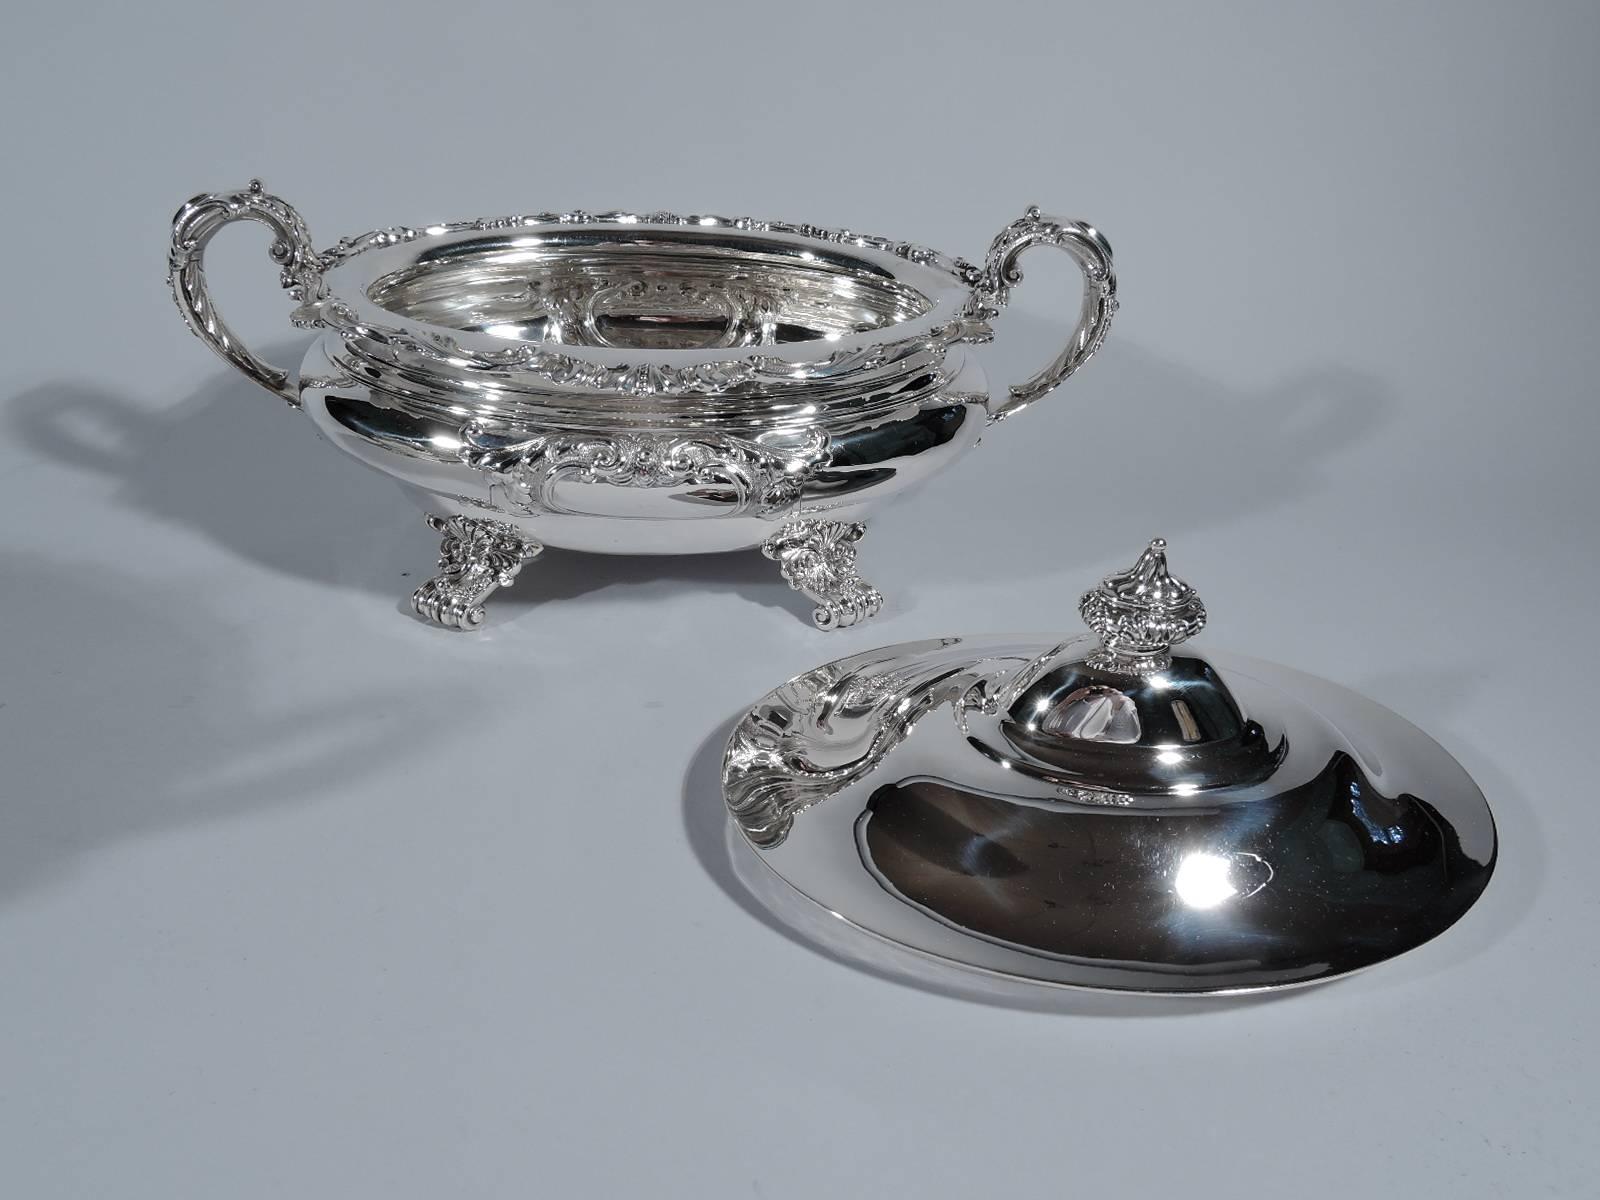 Edwardian Beautiful Pair of Antique Gorham Sterling Silver Covered Vegetable Dishes